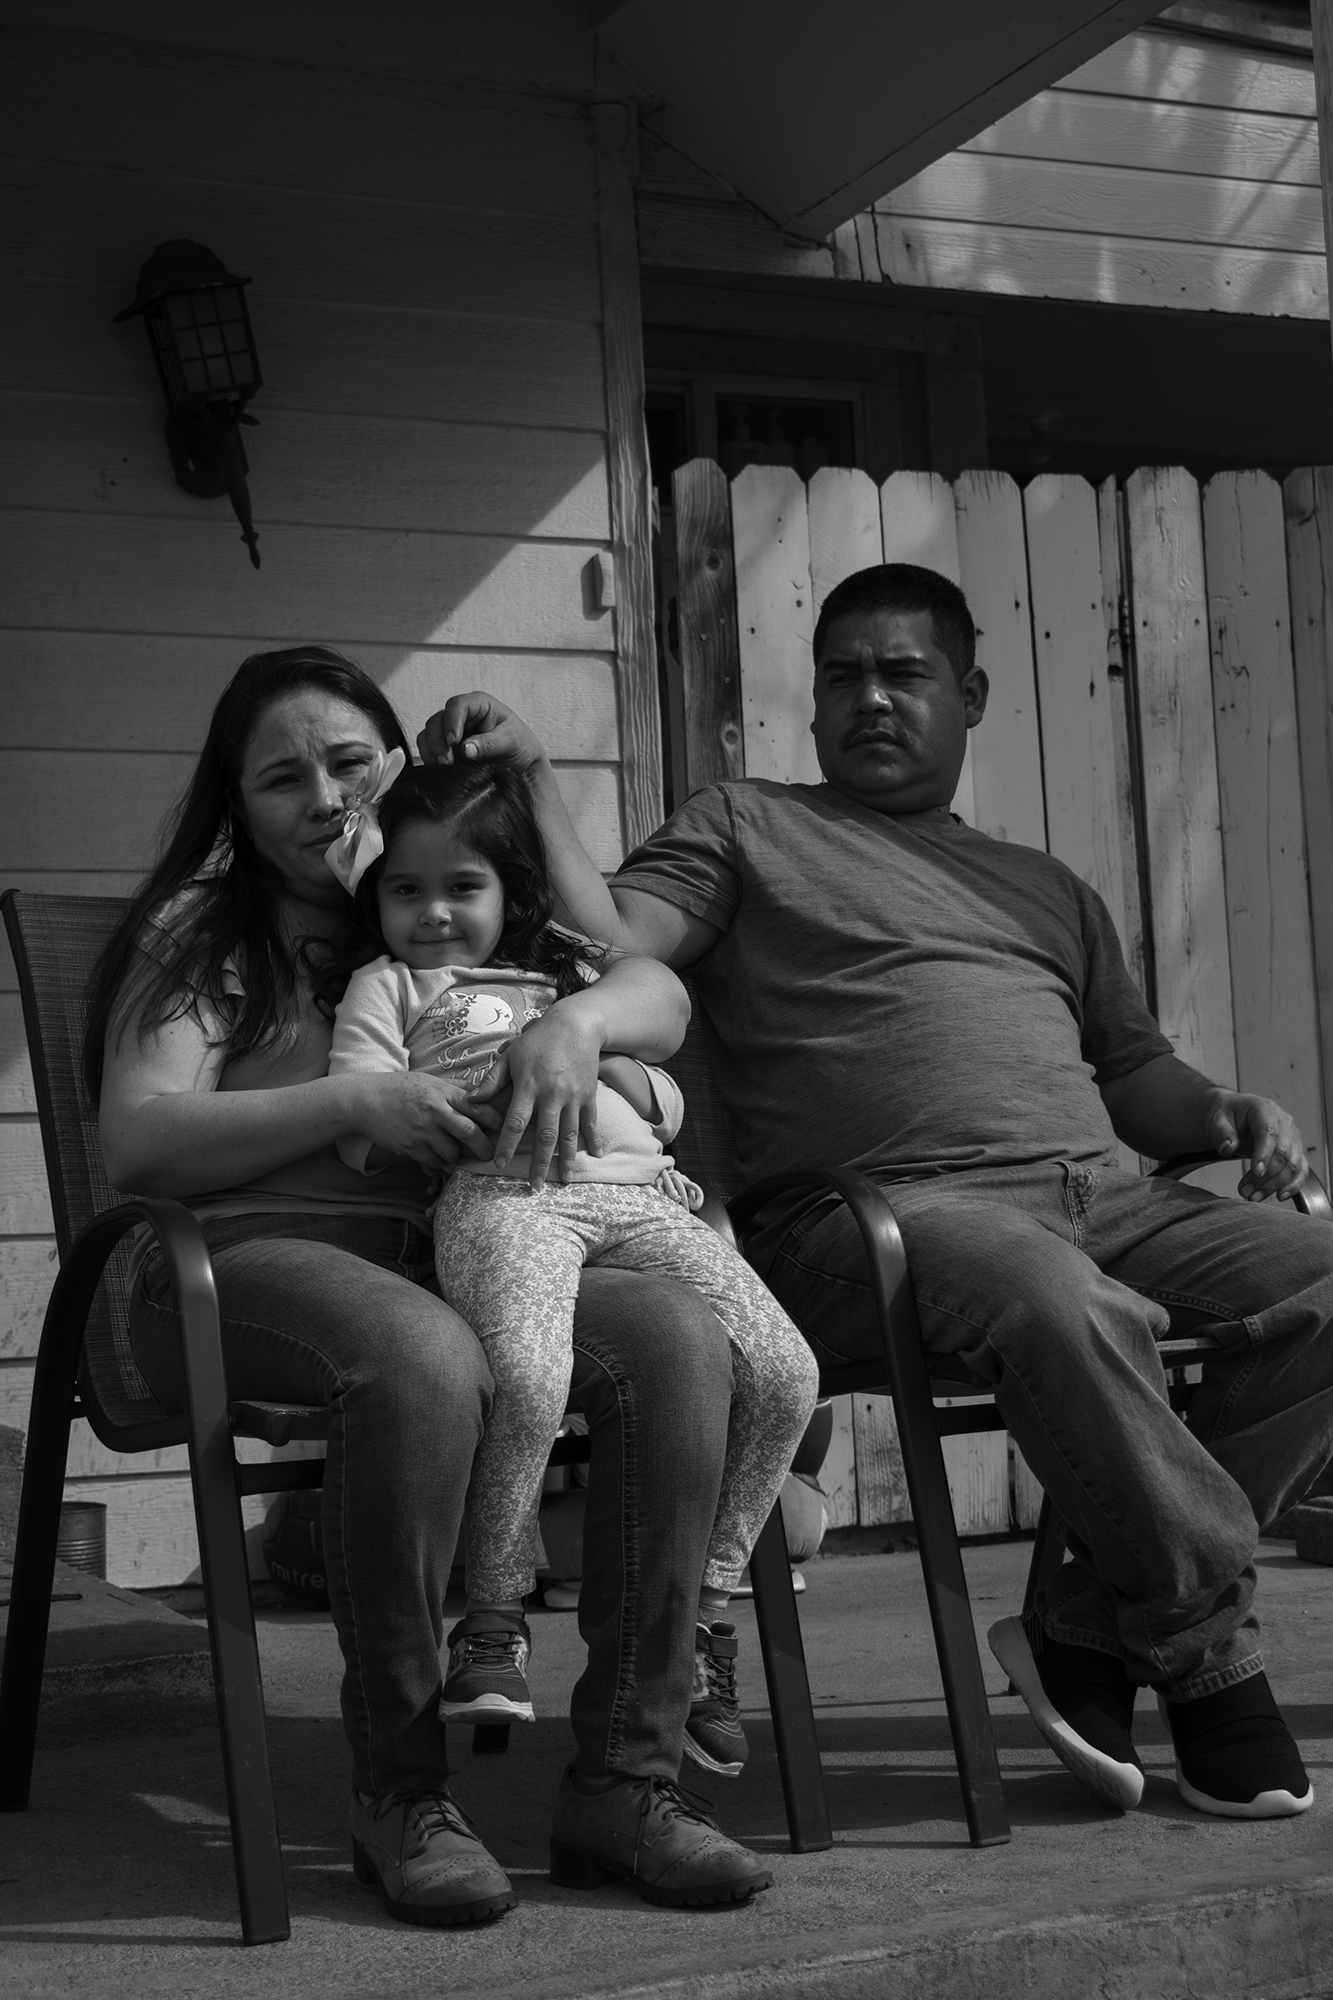 A family sits on a porch. A man sits on a chair to the right, while a woman sits on a chair to the left with a young girl in her lap.